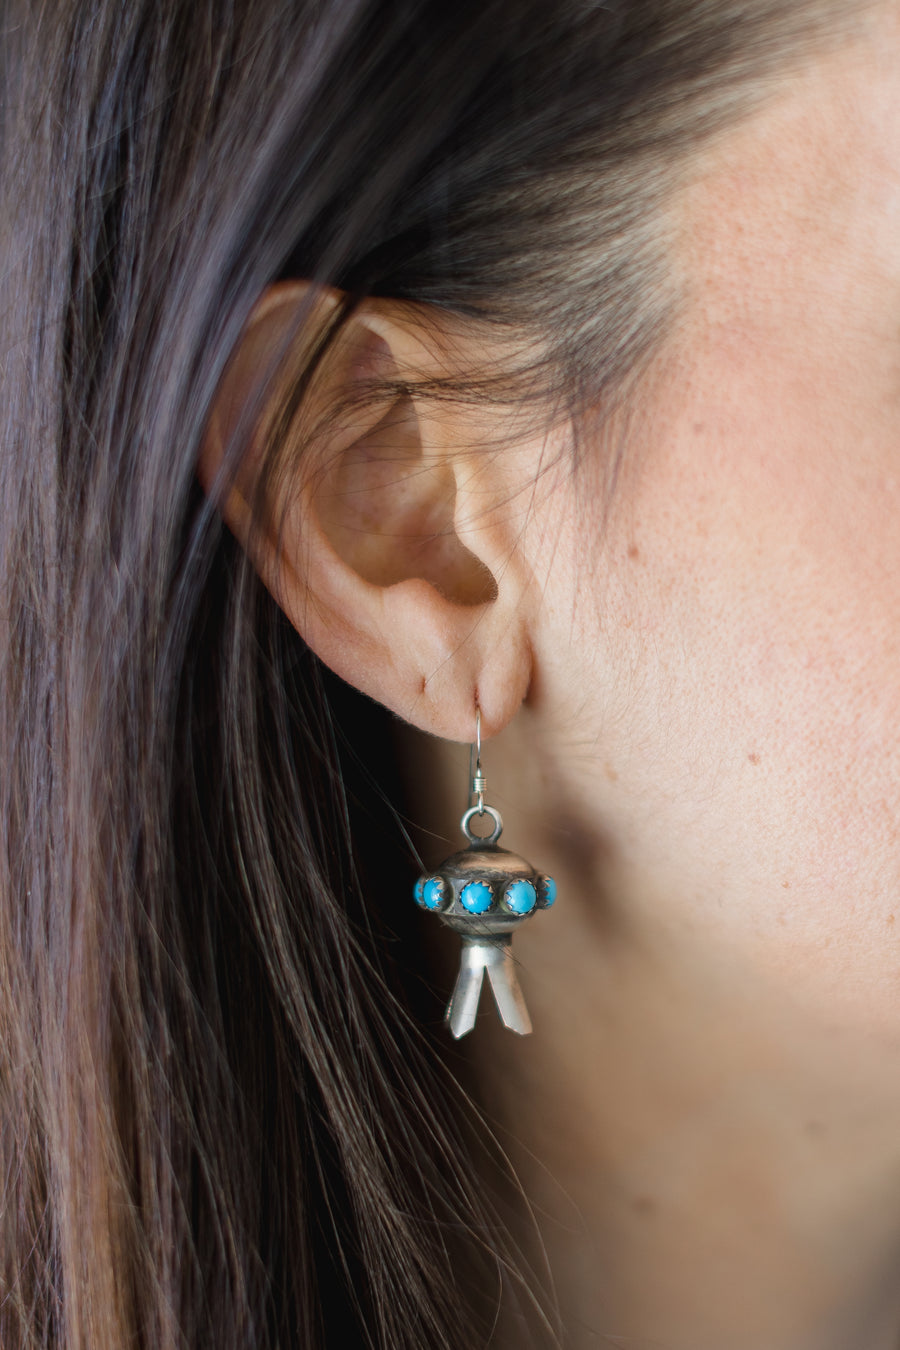 The Blossom Earrings - Blue Turquoise